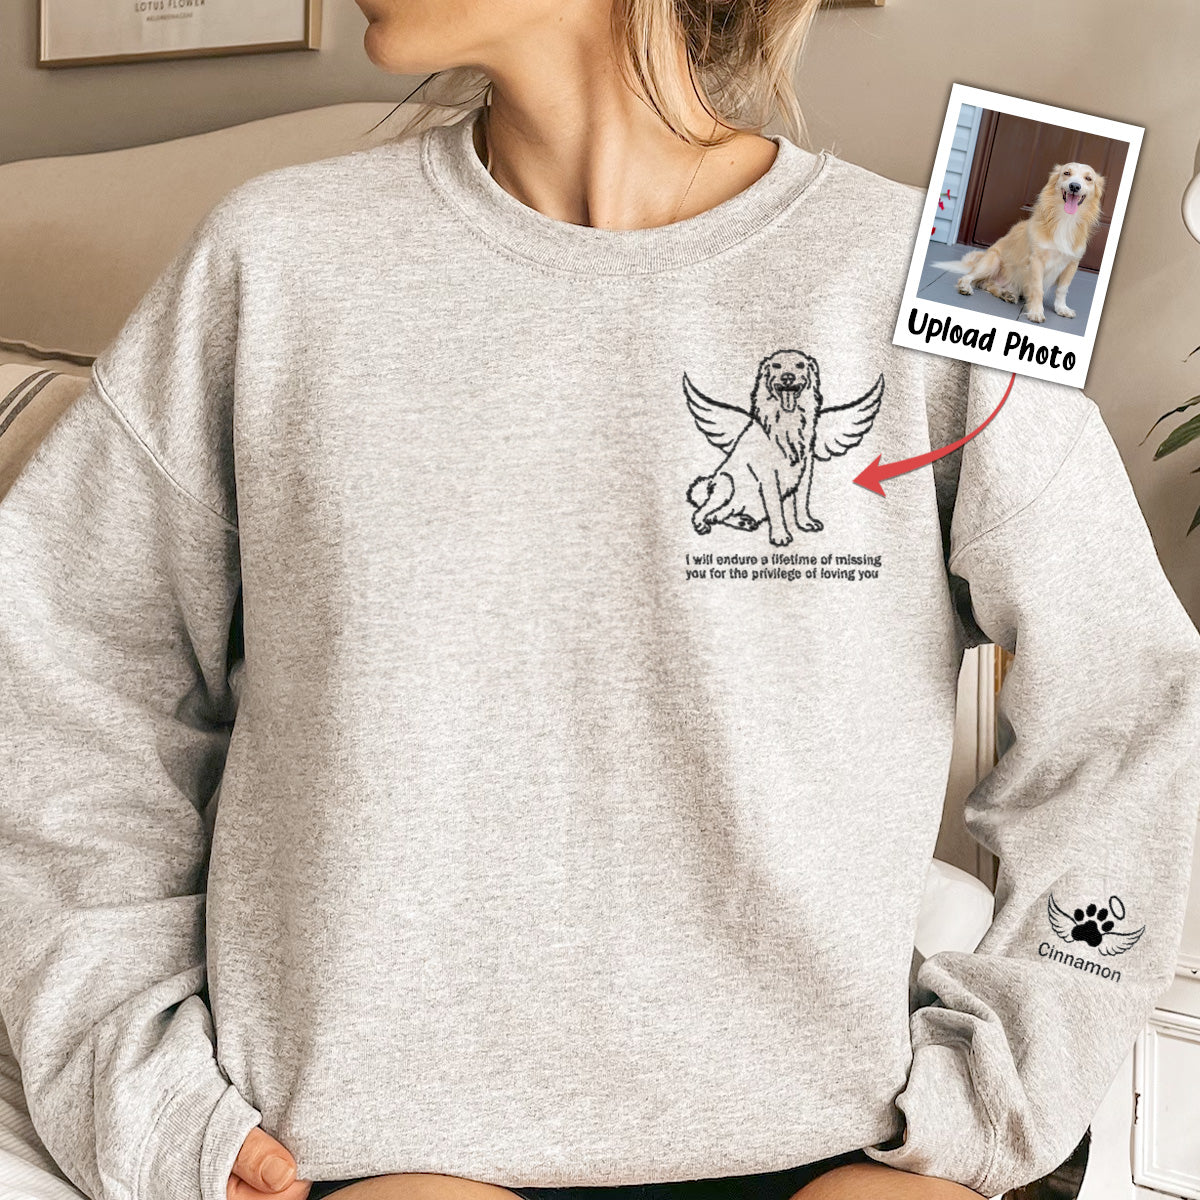 I Will Endure A Lifetime Of Missing You - Personalized Embroidered Sweatshirt